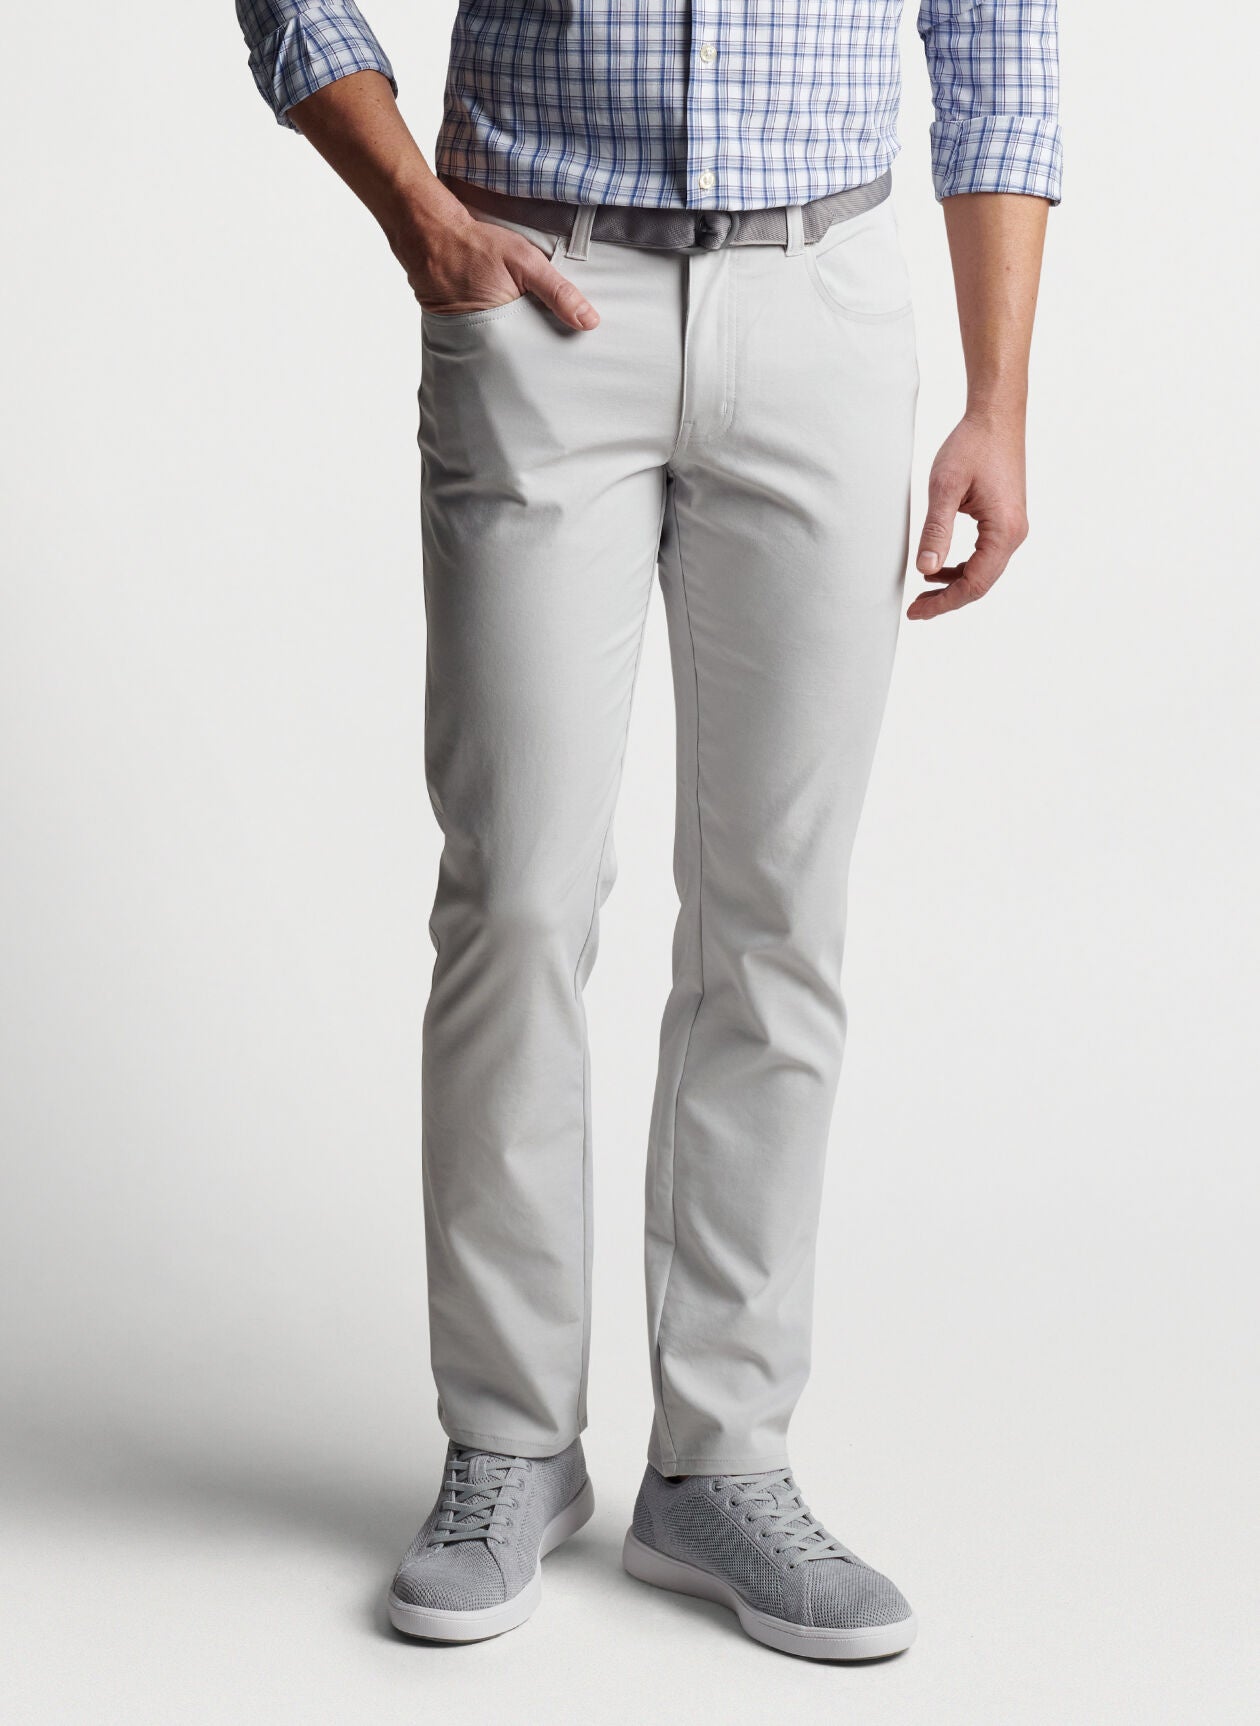 Grunt Grey Solid Casual Trouser | GRFFT-086 | Cilory.com